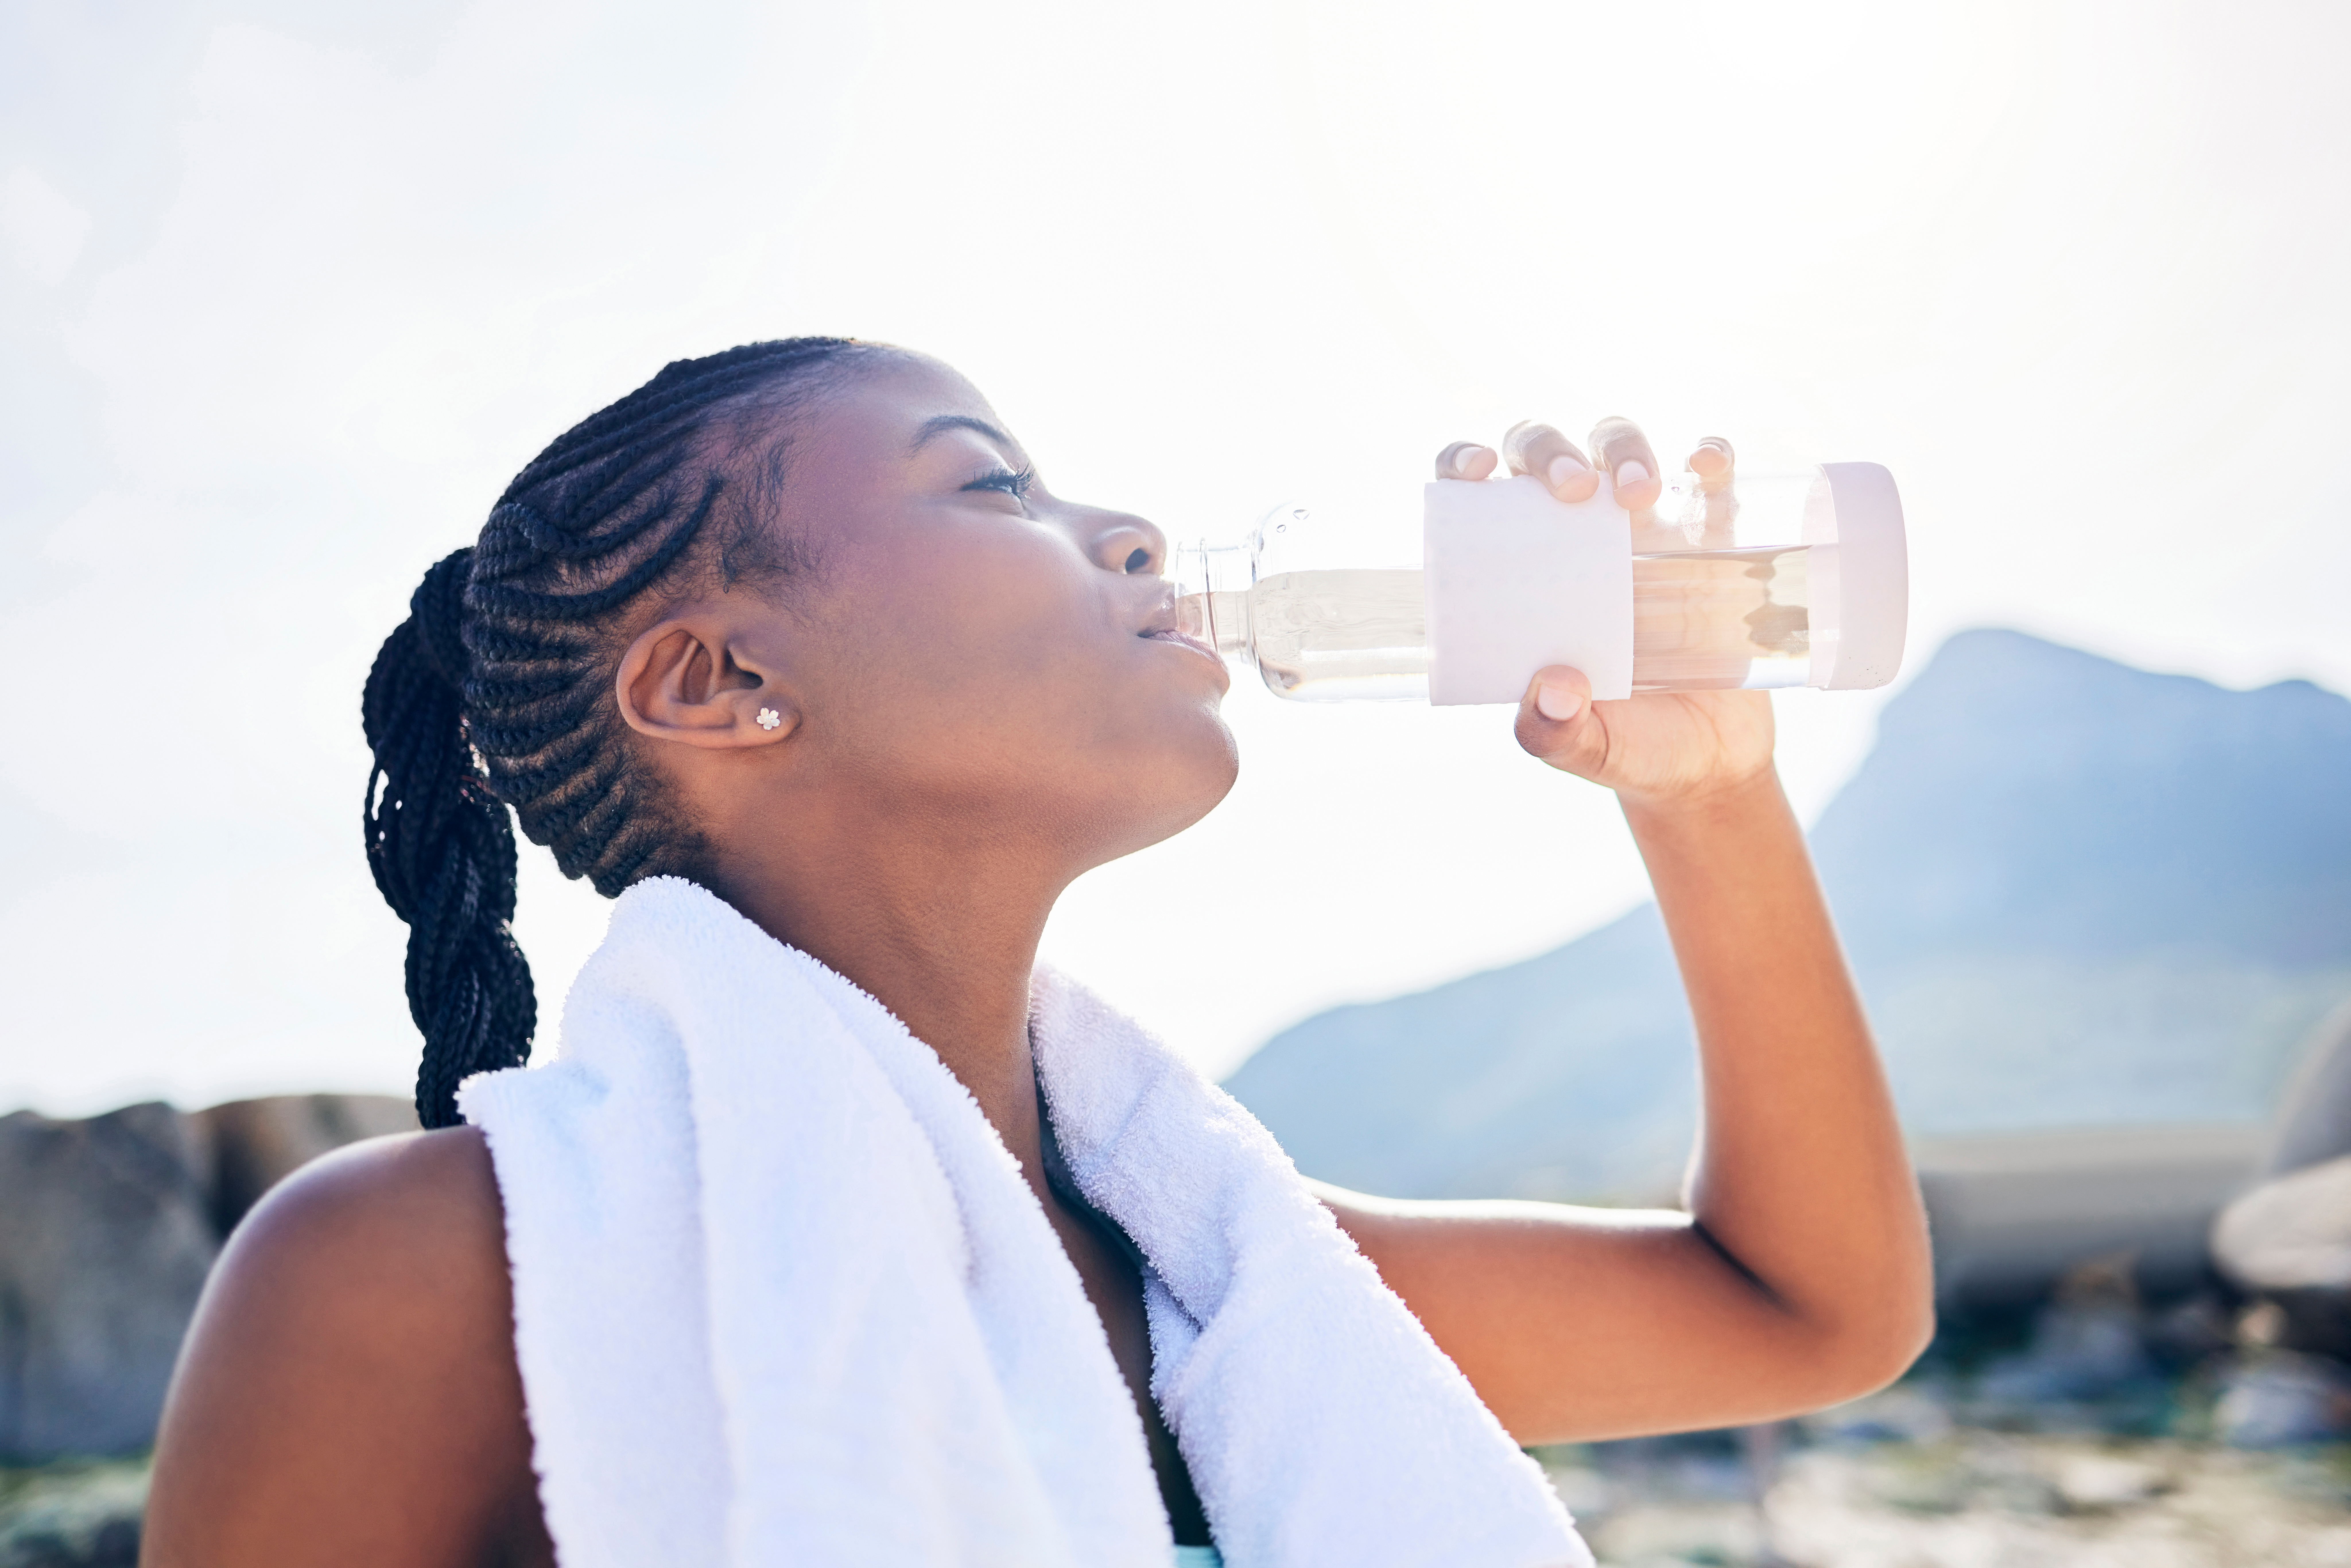 A woman drinking water on a hot day